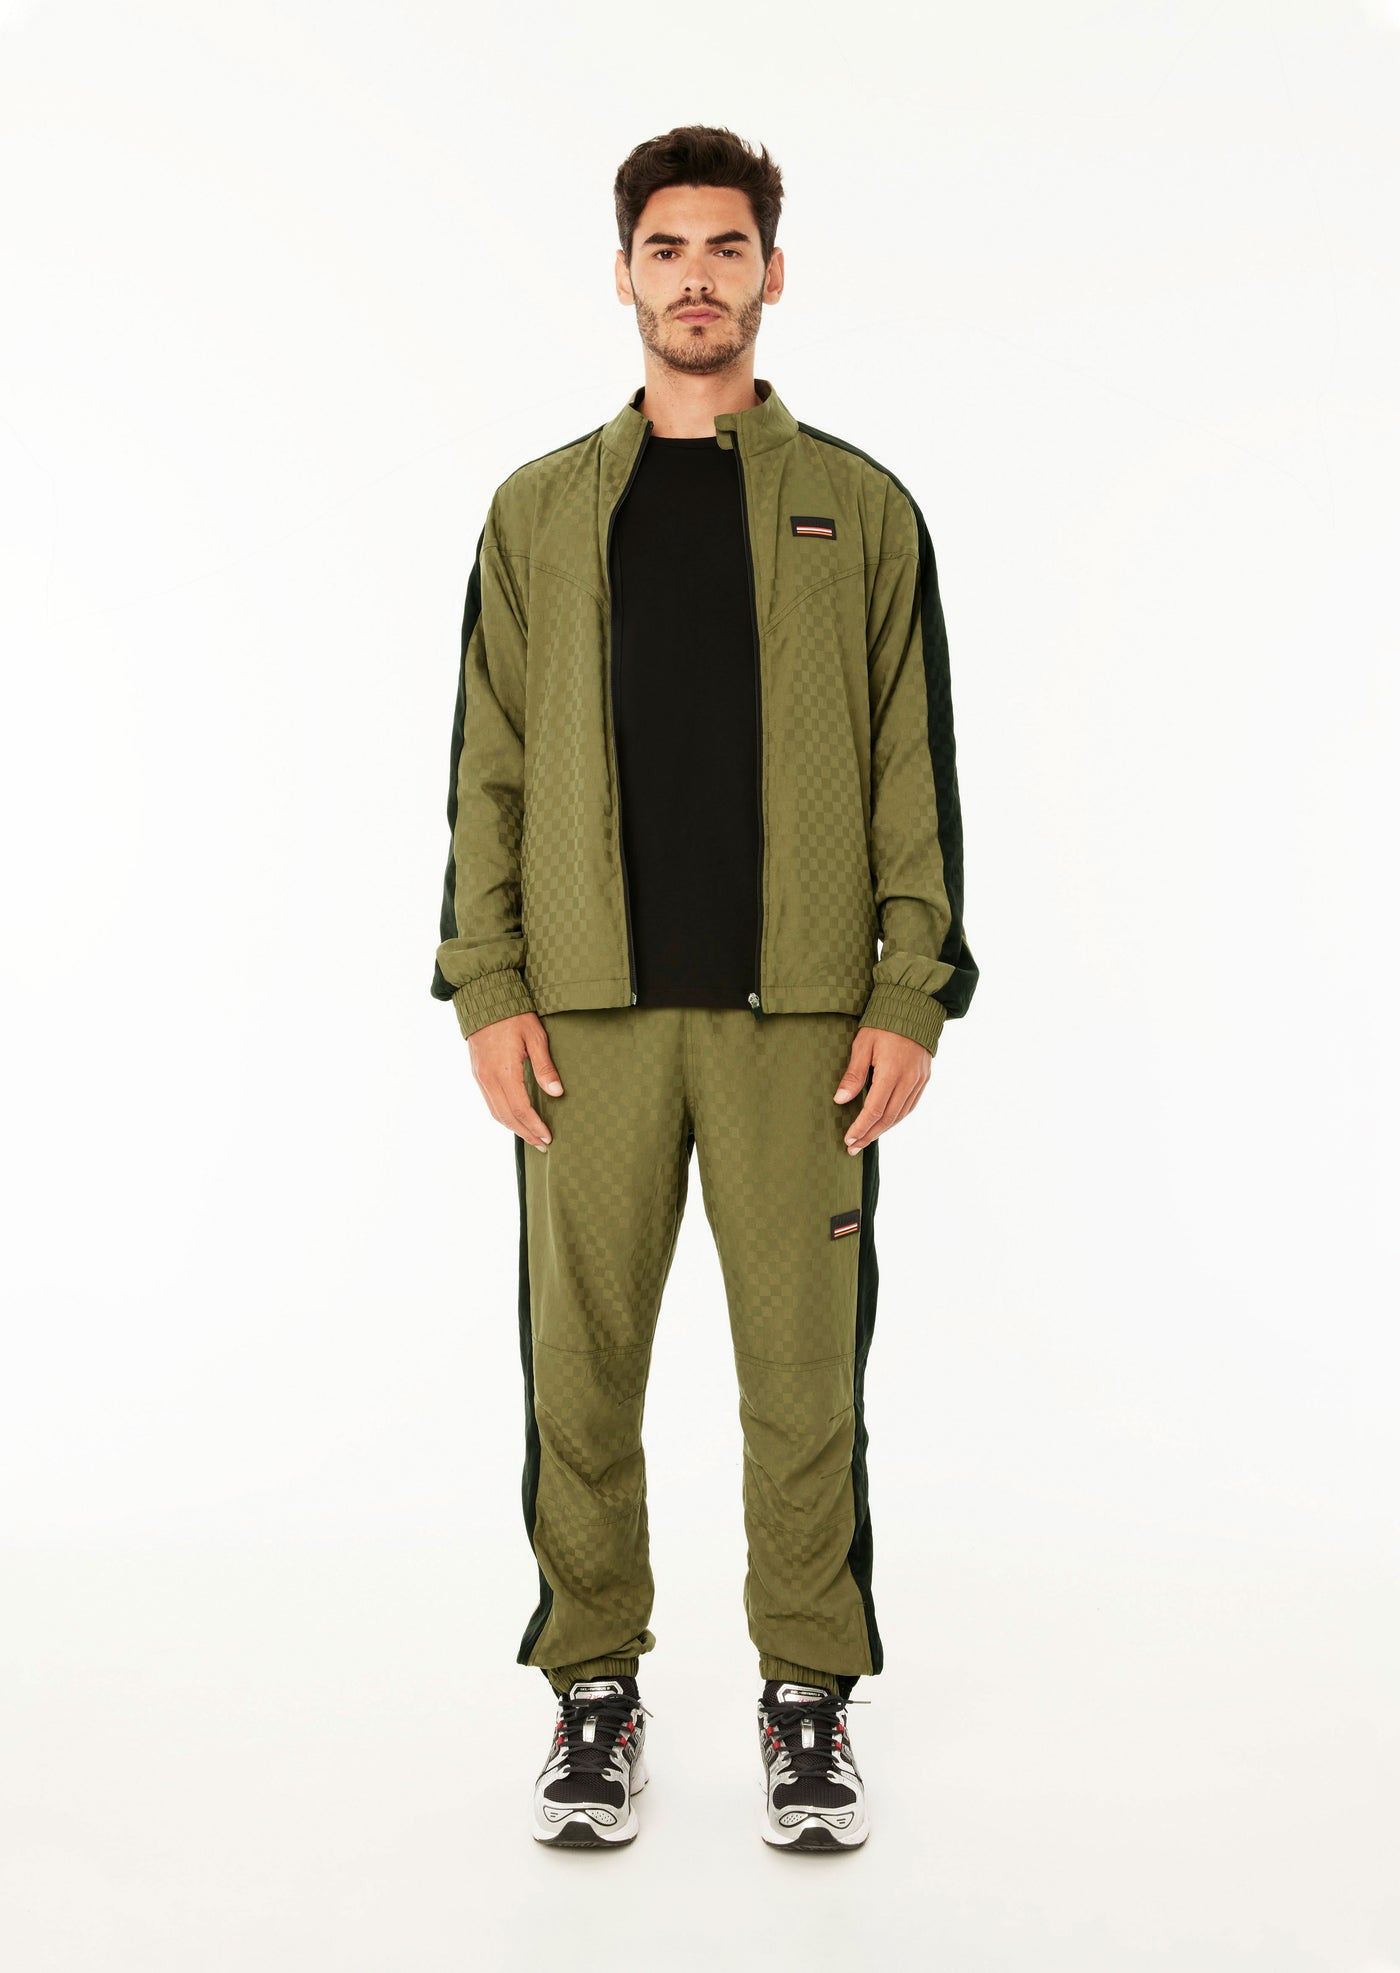 WEST DIVISION JACKET IN KHAKI